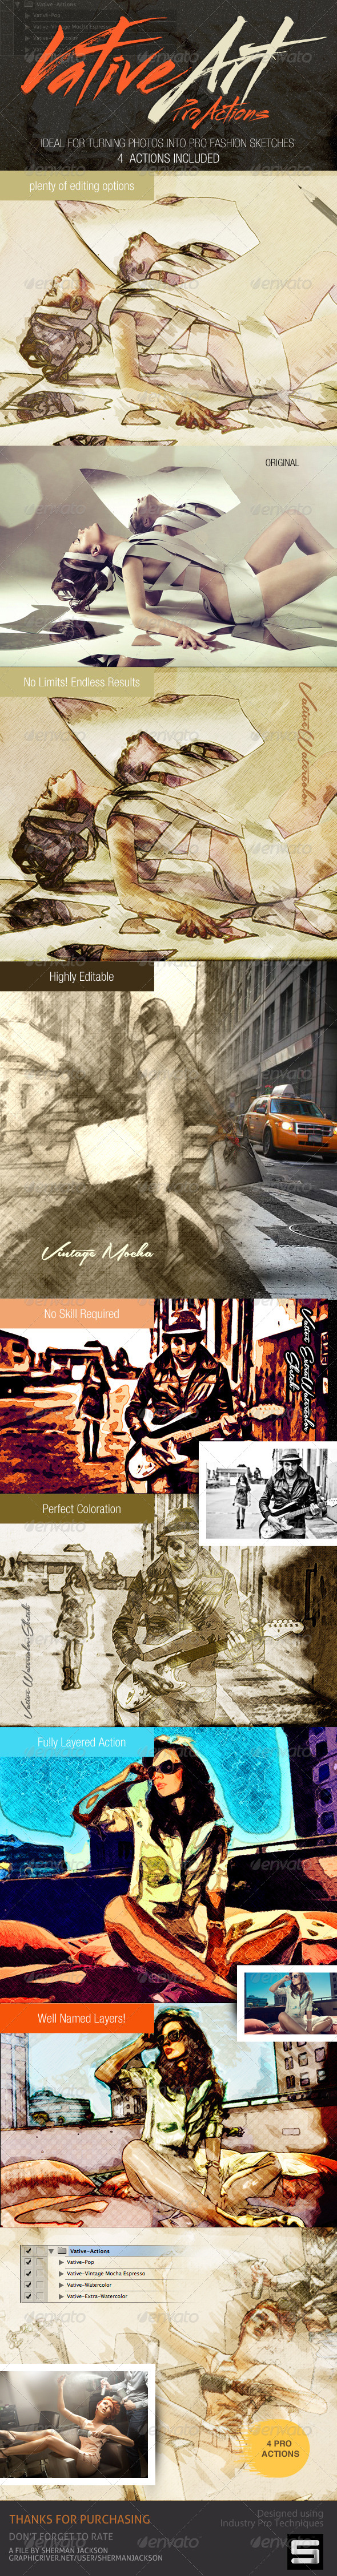 Vative Art Actions - Artistic Photoshop Actions - Photo Effects Actions